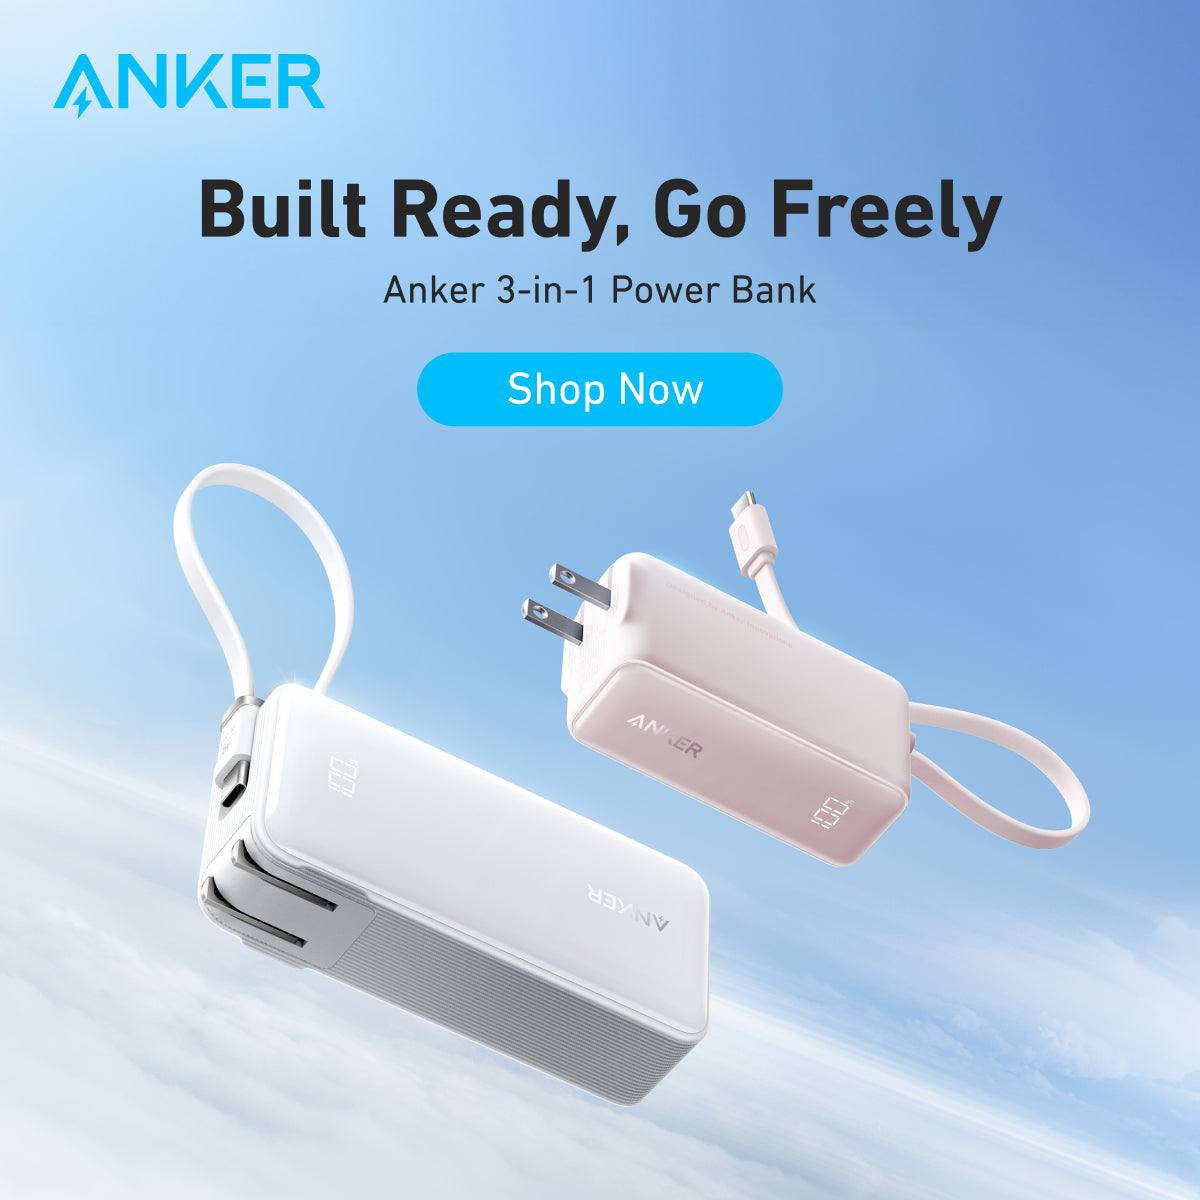 Anker Power Bank USB C Charger Block, 3-in-1 5,000mAh 10,000mAh Portable Charger with Built-in USB-C Cable and Foldable AC Plug, 30W Max Compact Battery Pack, for iPhone 15 Series, Galaxy, MacBook and More Pink-5000mAh